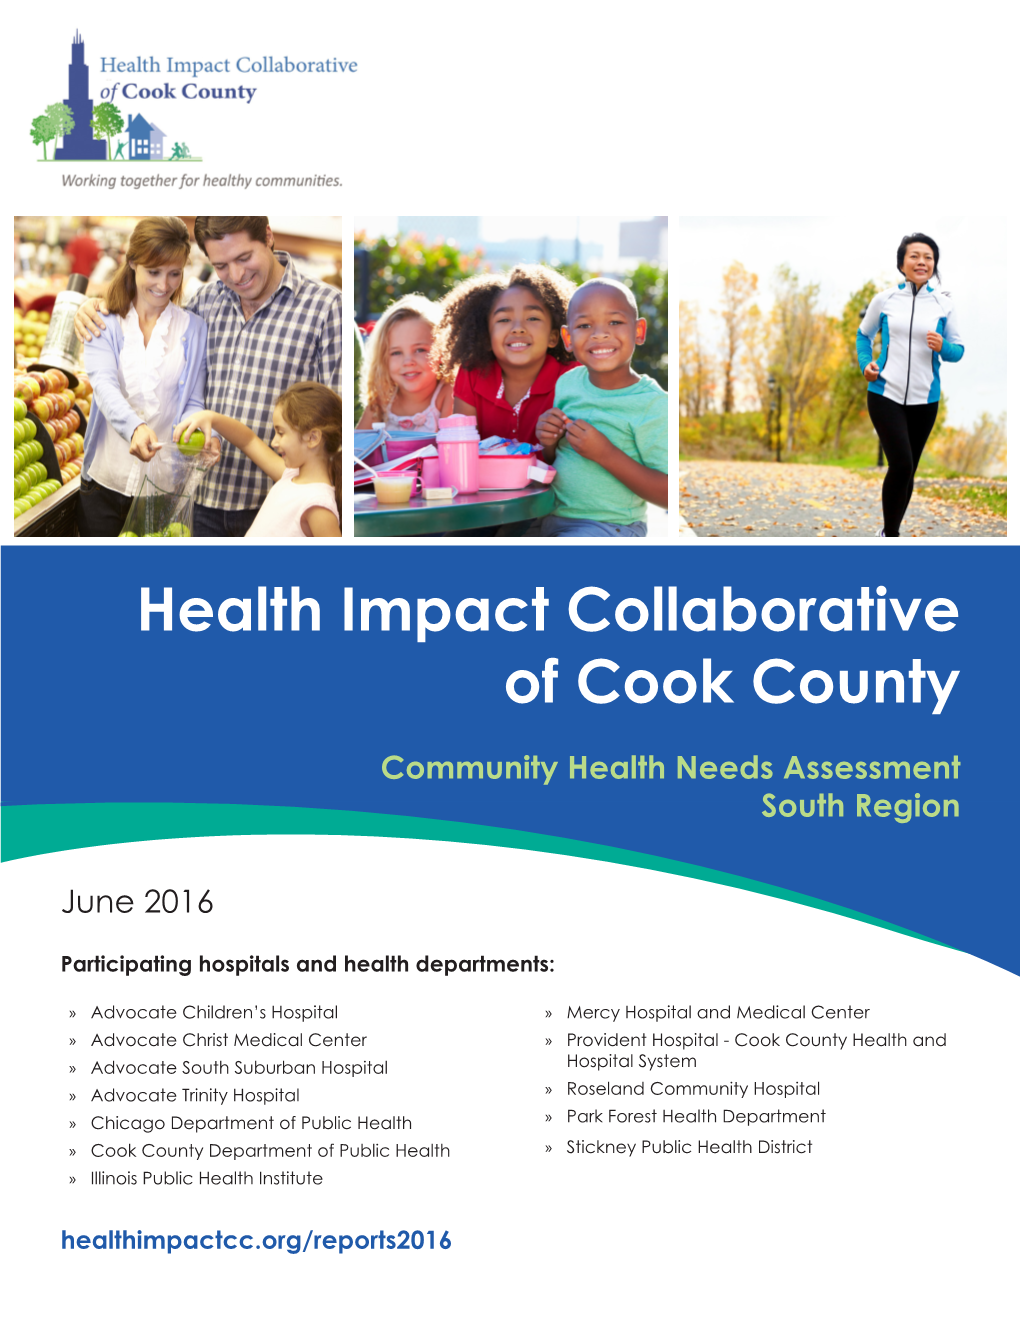 Health Impact Collaborative of Cook County, CHNA, South Region, 2016